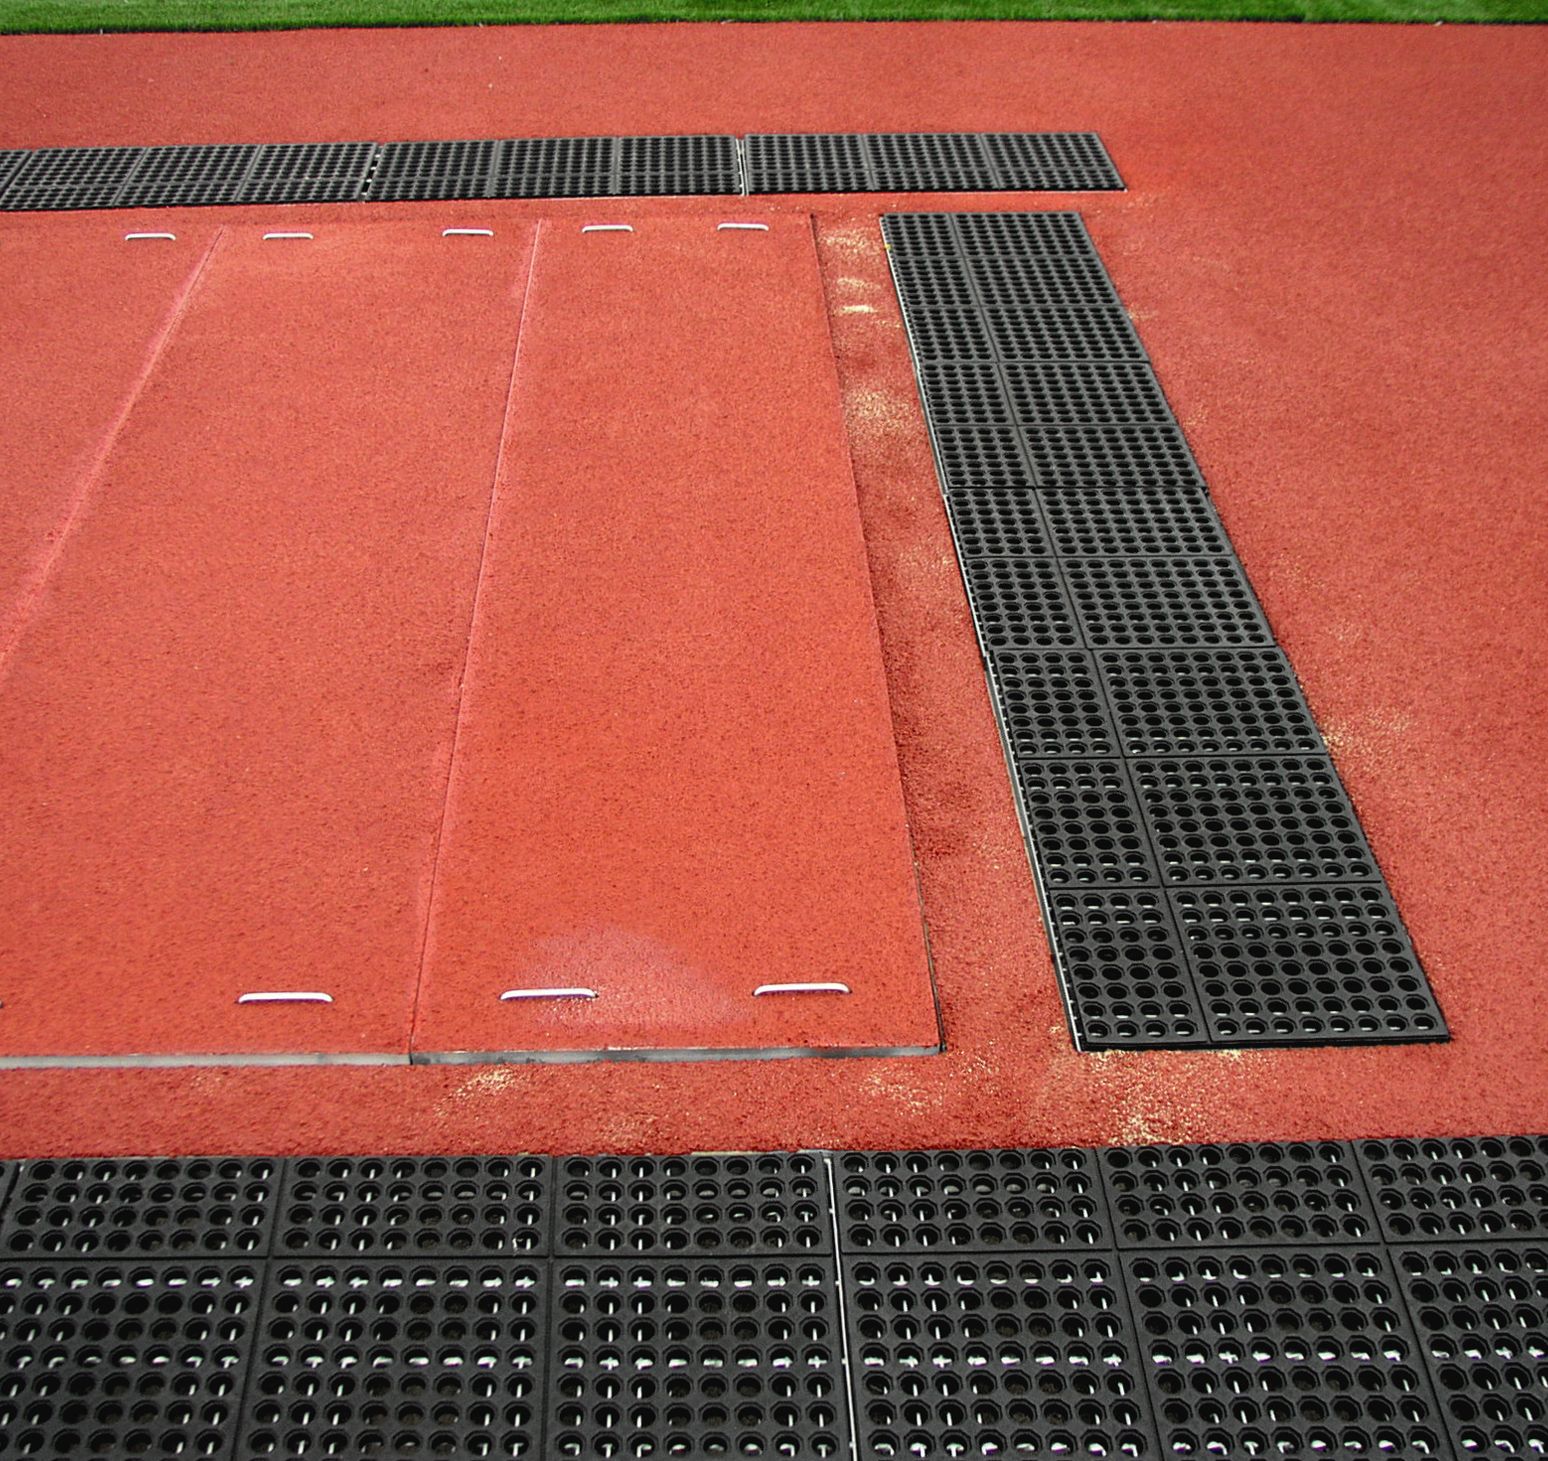 GRATE & MAT SAND CATCHER COVER SYSTEM